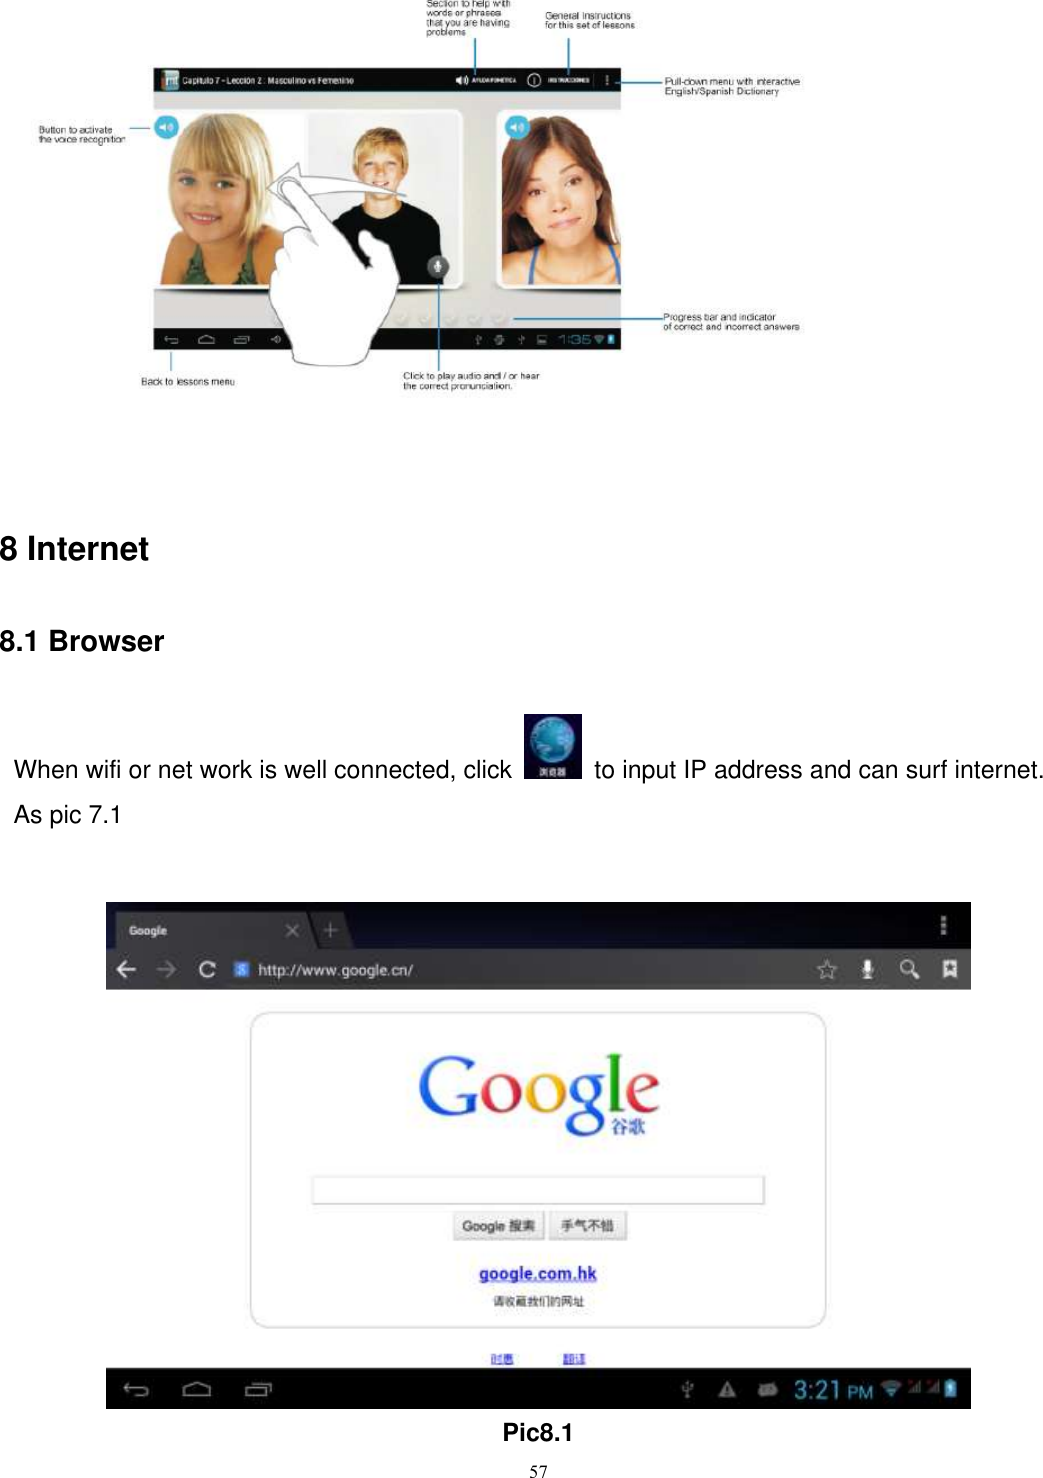      57     8 Internet 8.1 Browser When wifi or net work is well connected, click    to input IP address and can surf internet. As pic 7.1      Pic8.1 